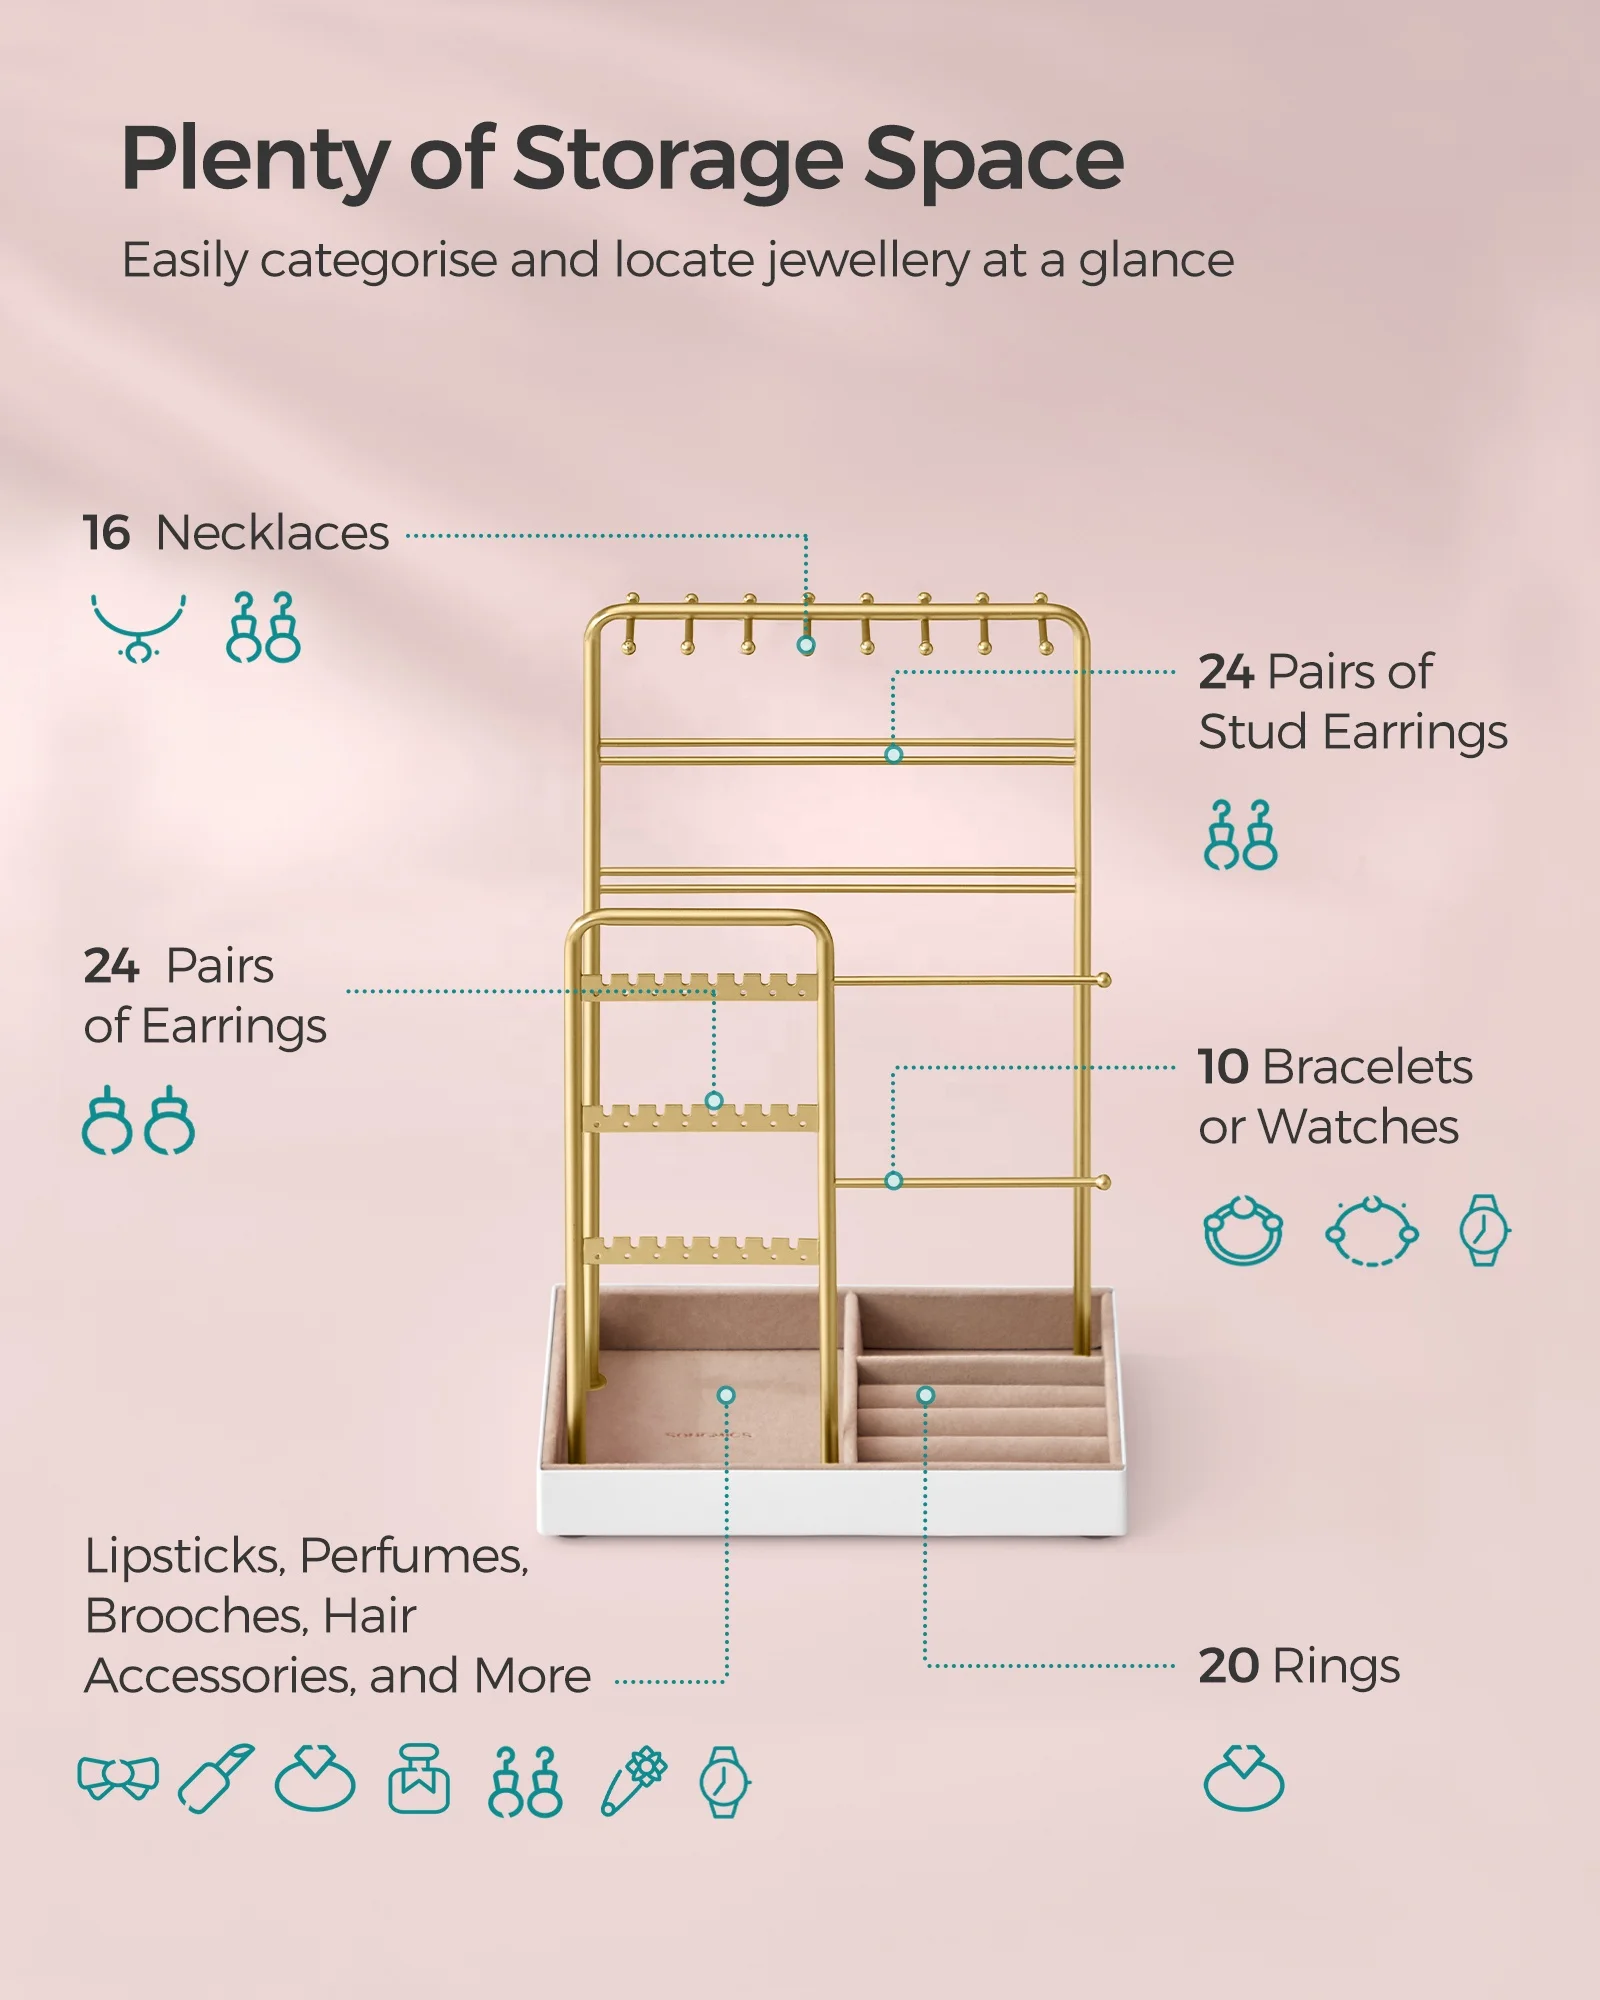 SONGMICS Jewelry Organiser Earring Bracelet Holder Necklace Stand for Studs Rings Jewelry Display Stand with Metal Frame and Vel